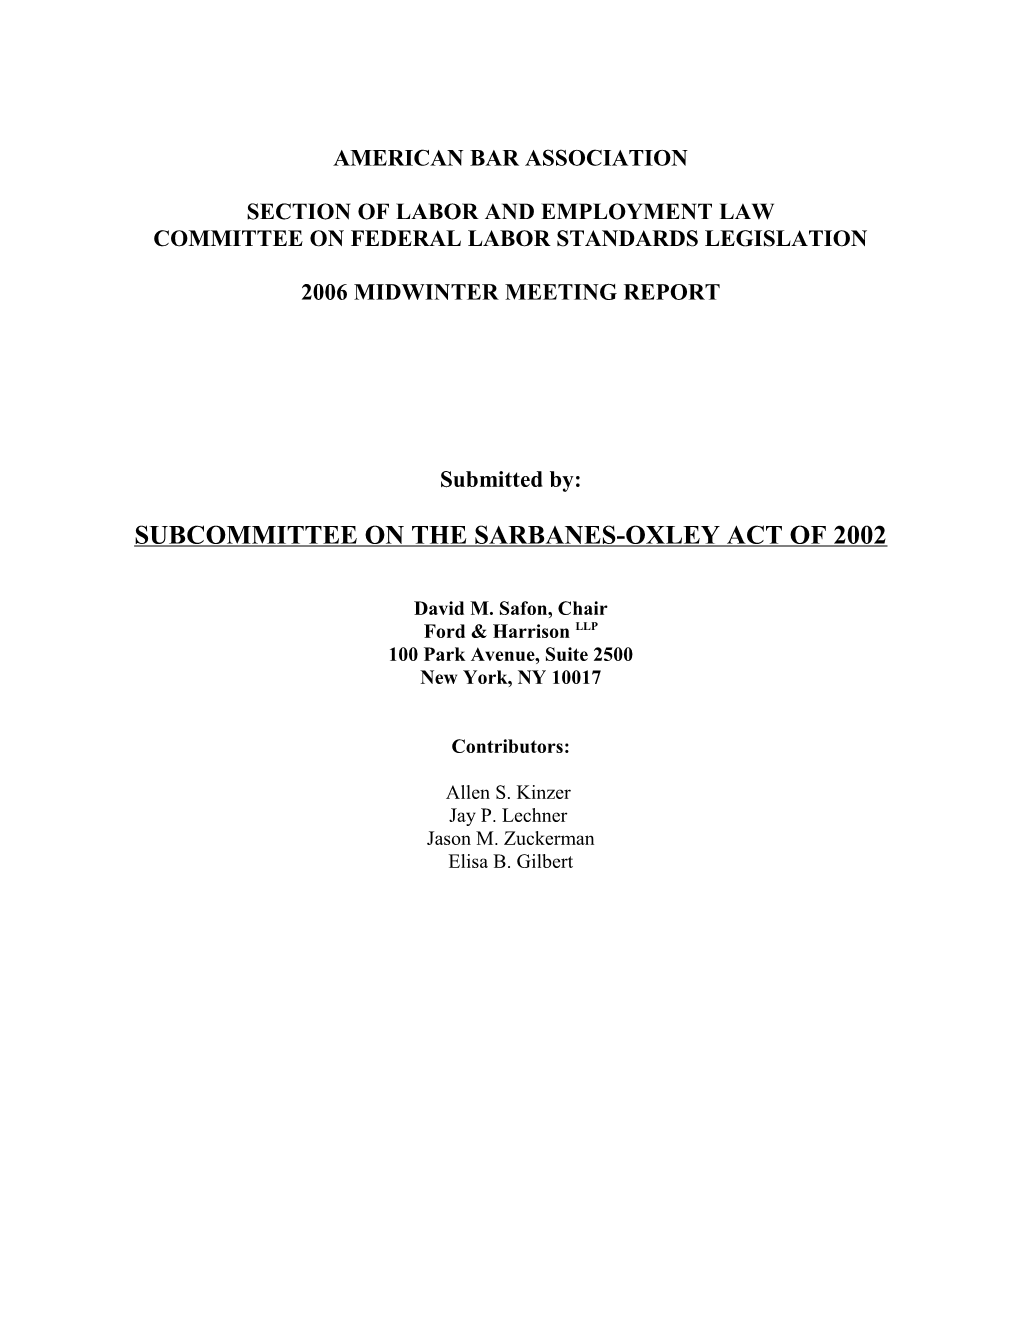 2006 Annual Update on the Whistleblower Provisions of the Sarbanes-Oxley Act of 2002